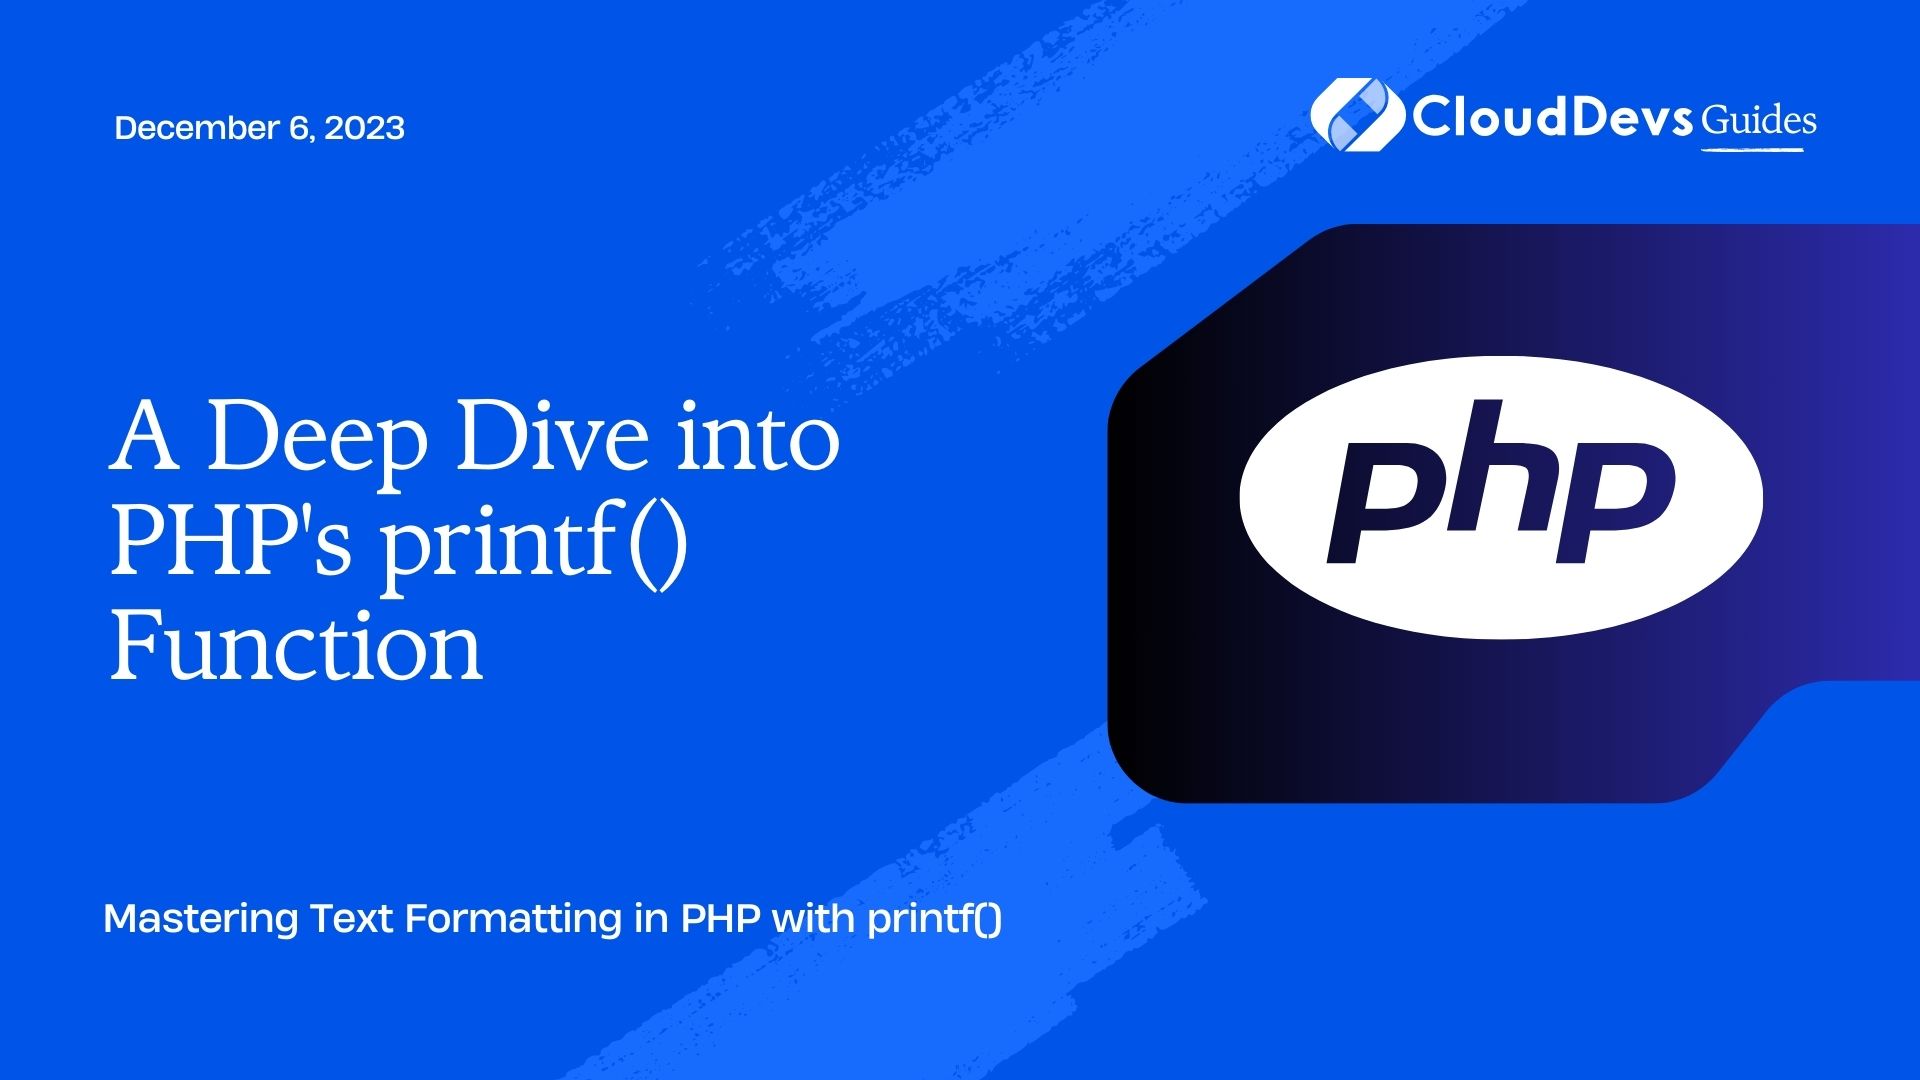 A Deep Dive into PHP's printf() Function